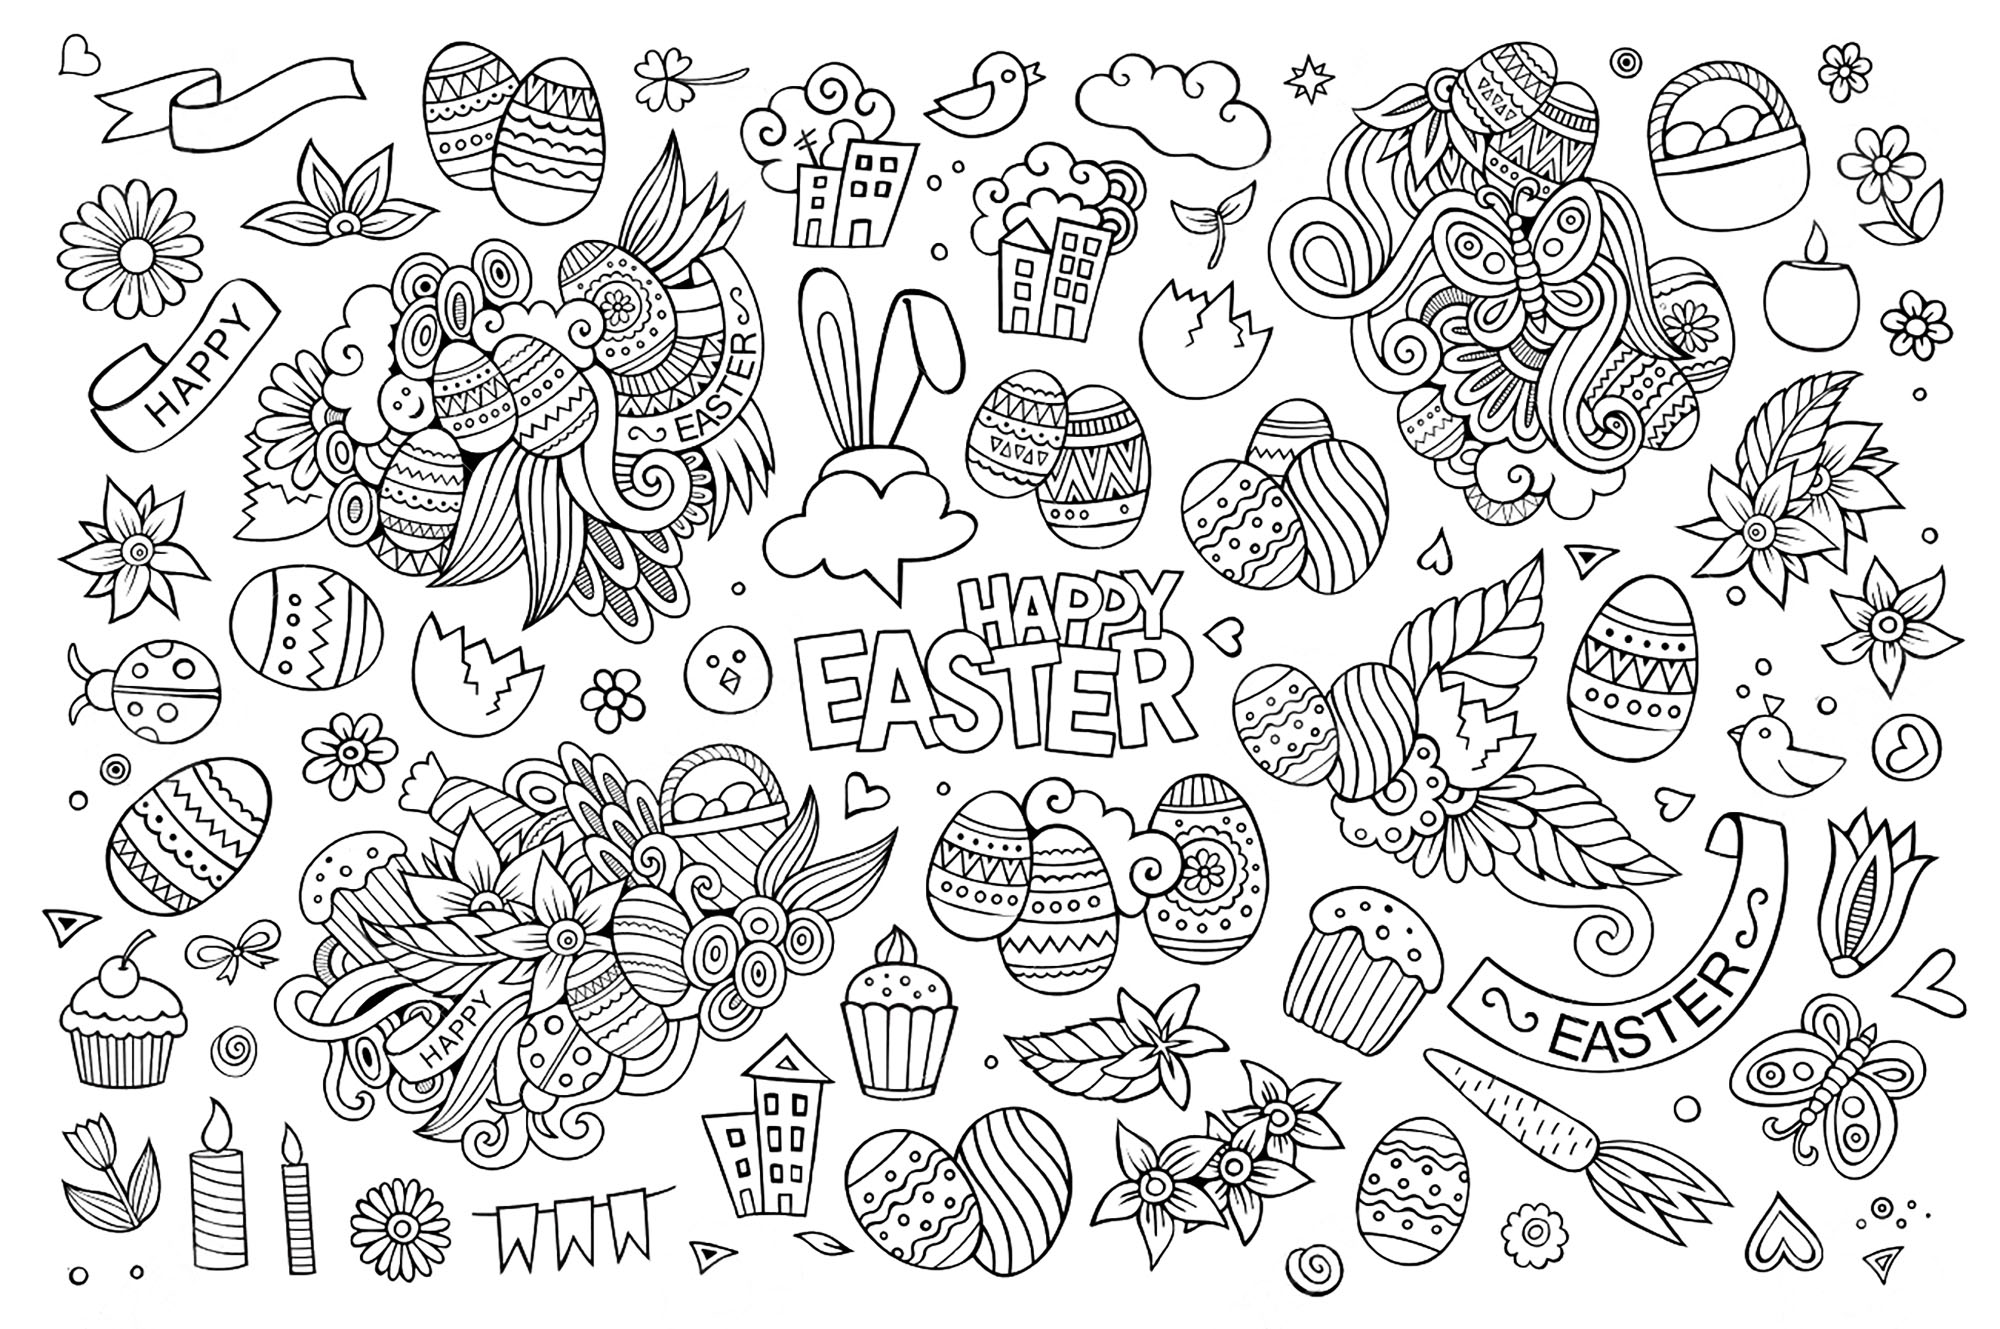 Fun Easter coloring pages to print and color